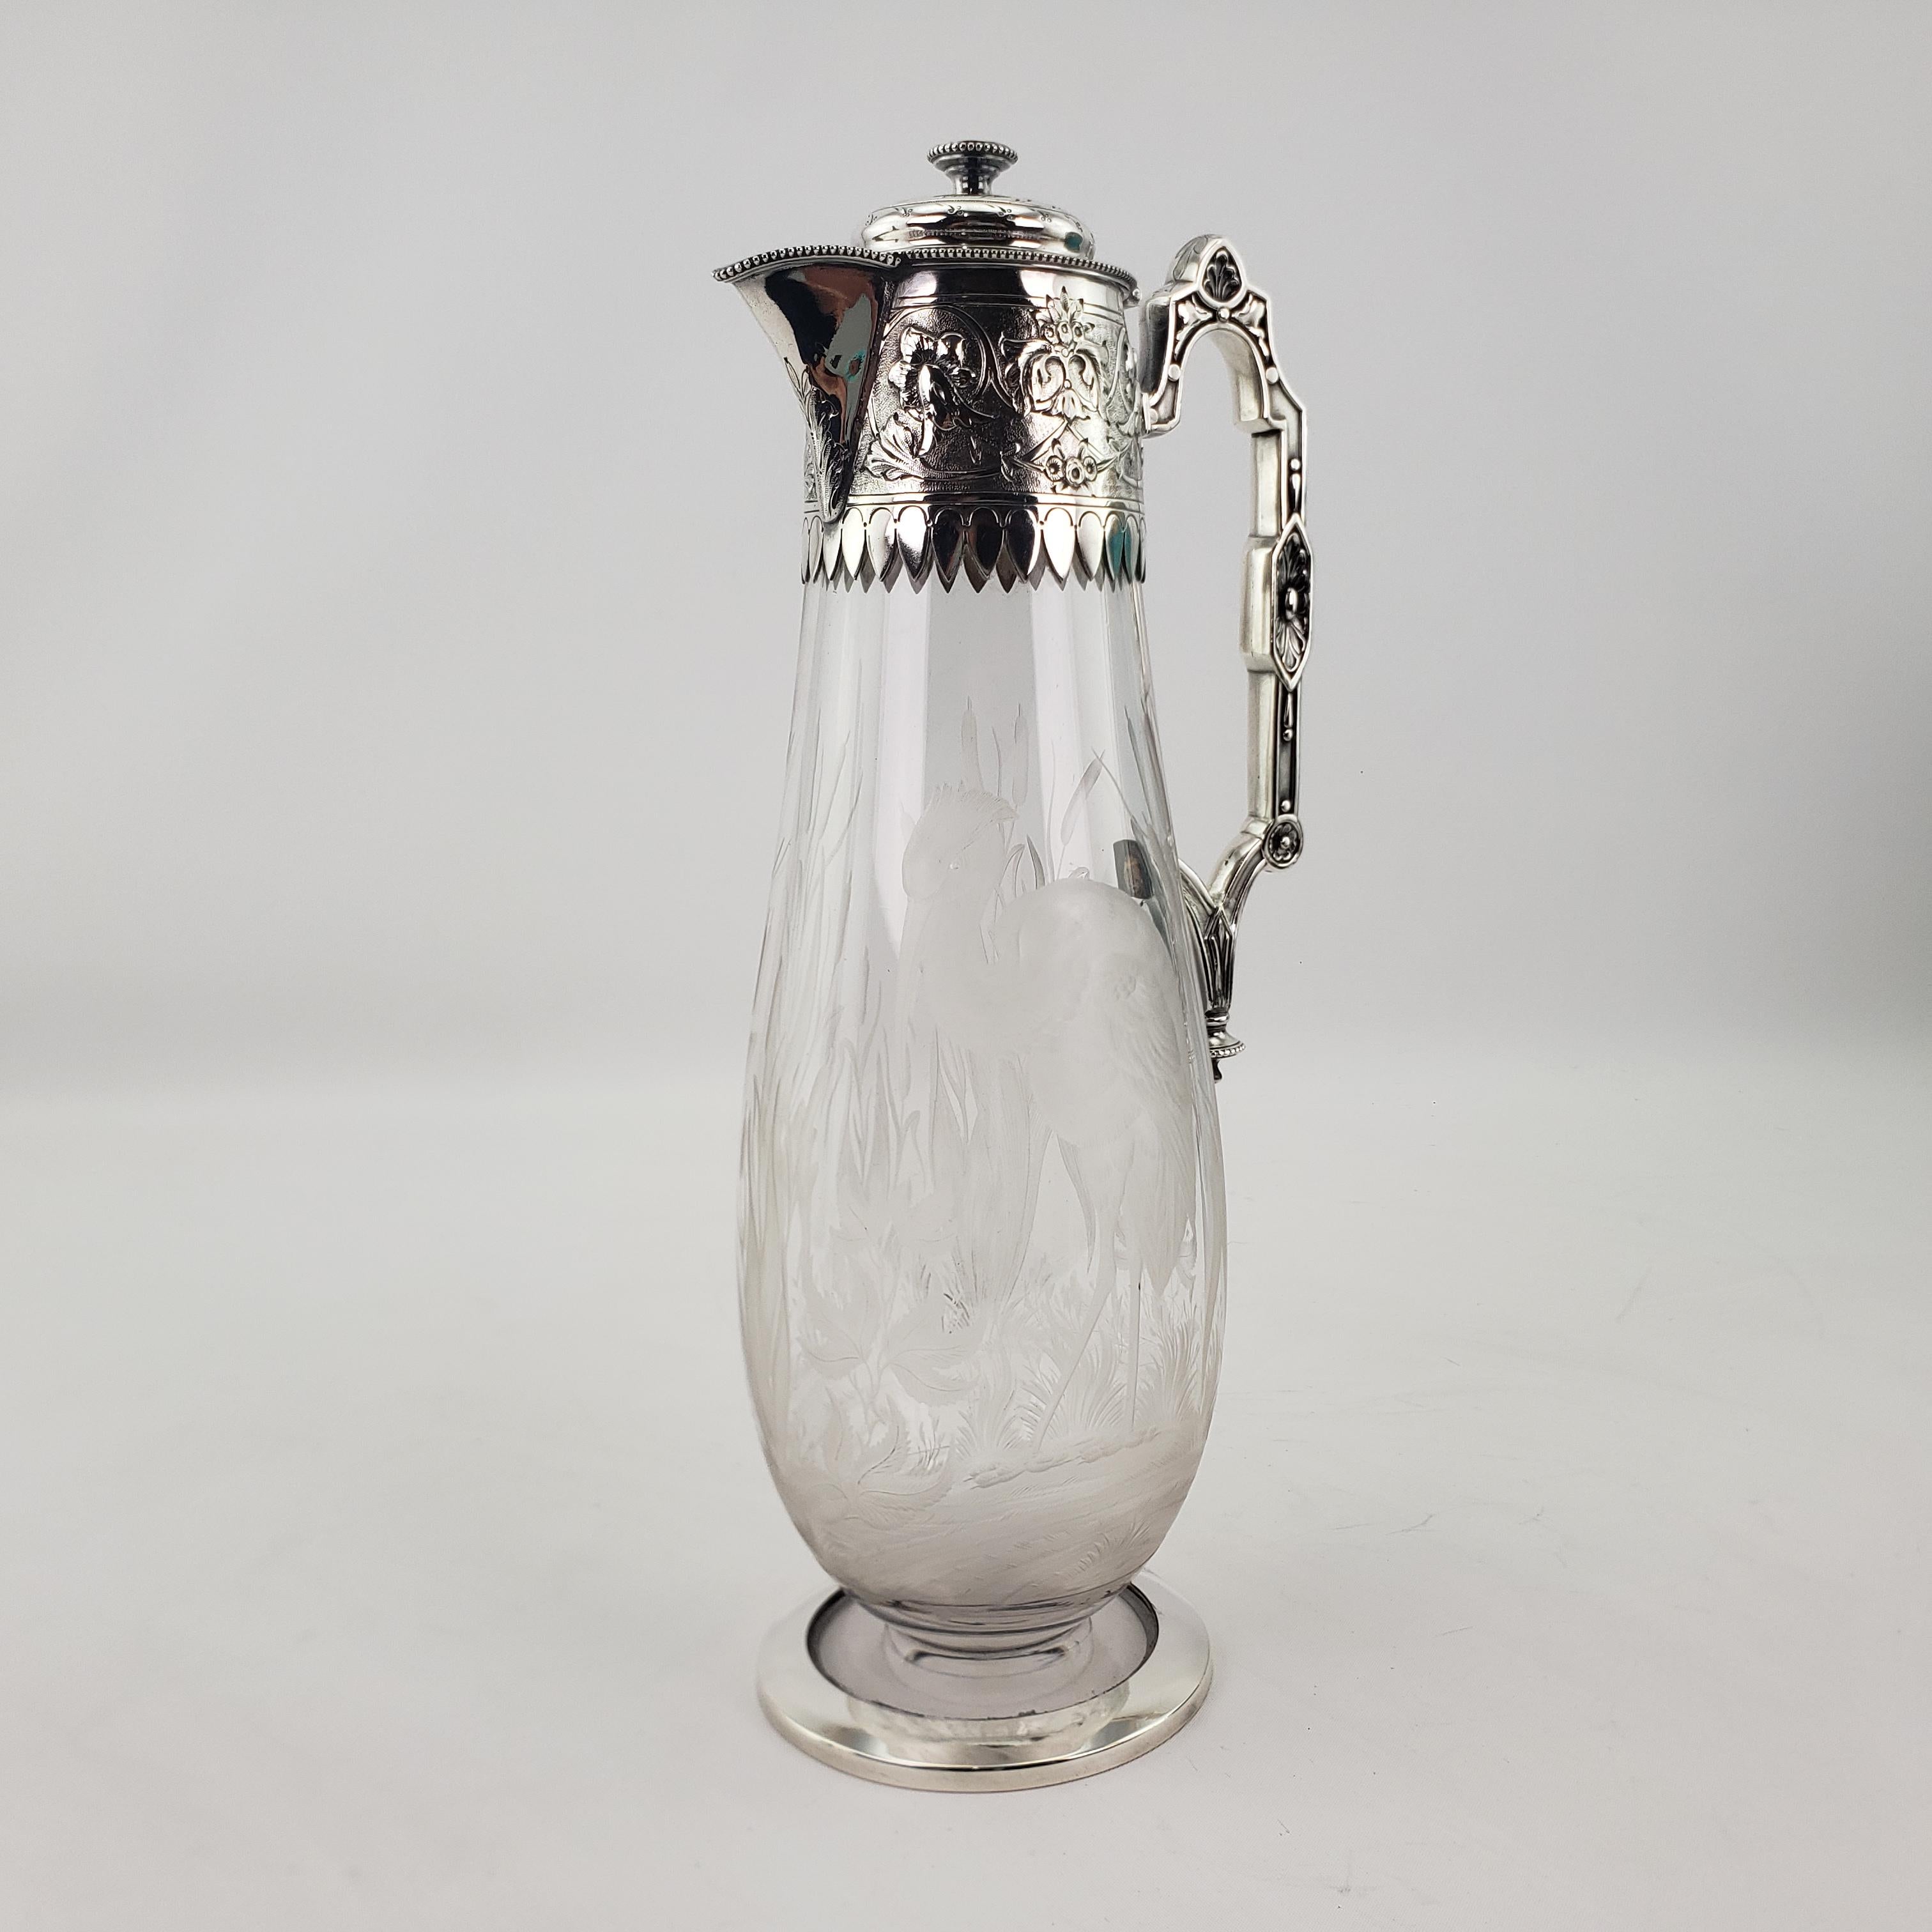 This very well executed engraved crystal and silver plated claret jug is hallmarked by the renowned Elkington & Co. of England and dating to approximately 1880 in the period Victorian style. This claret jug has highly detailed cast and silver plated